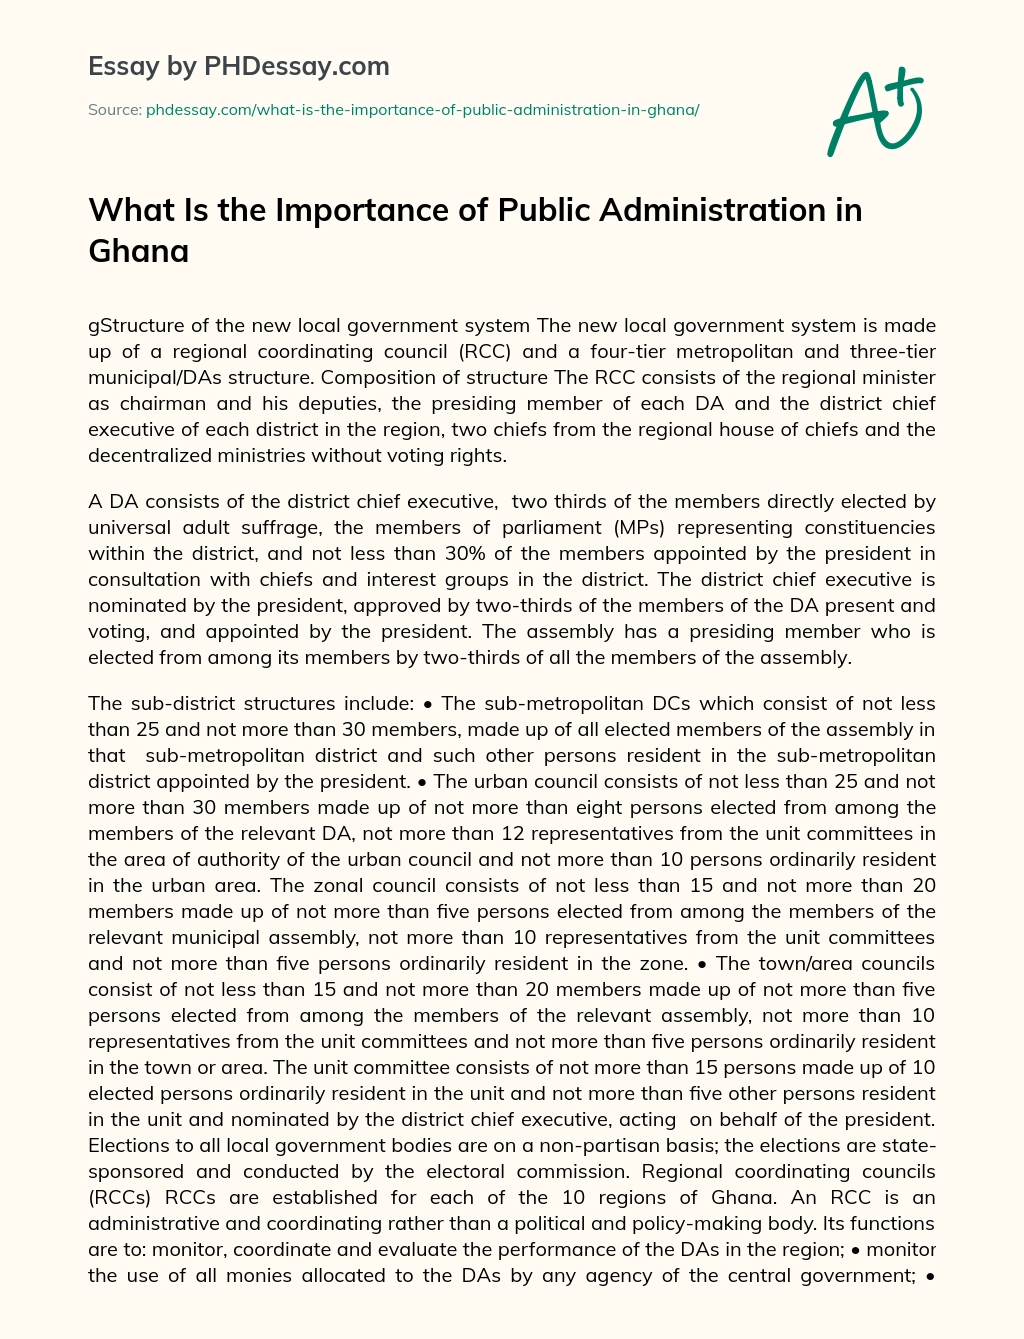 What Is the Importance of Public Administration in Ghana essay